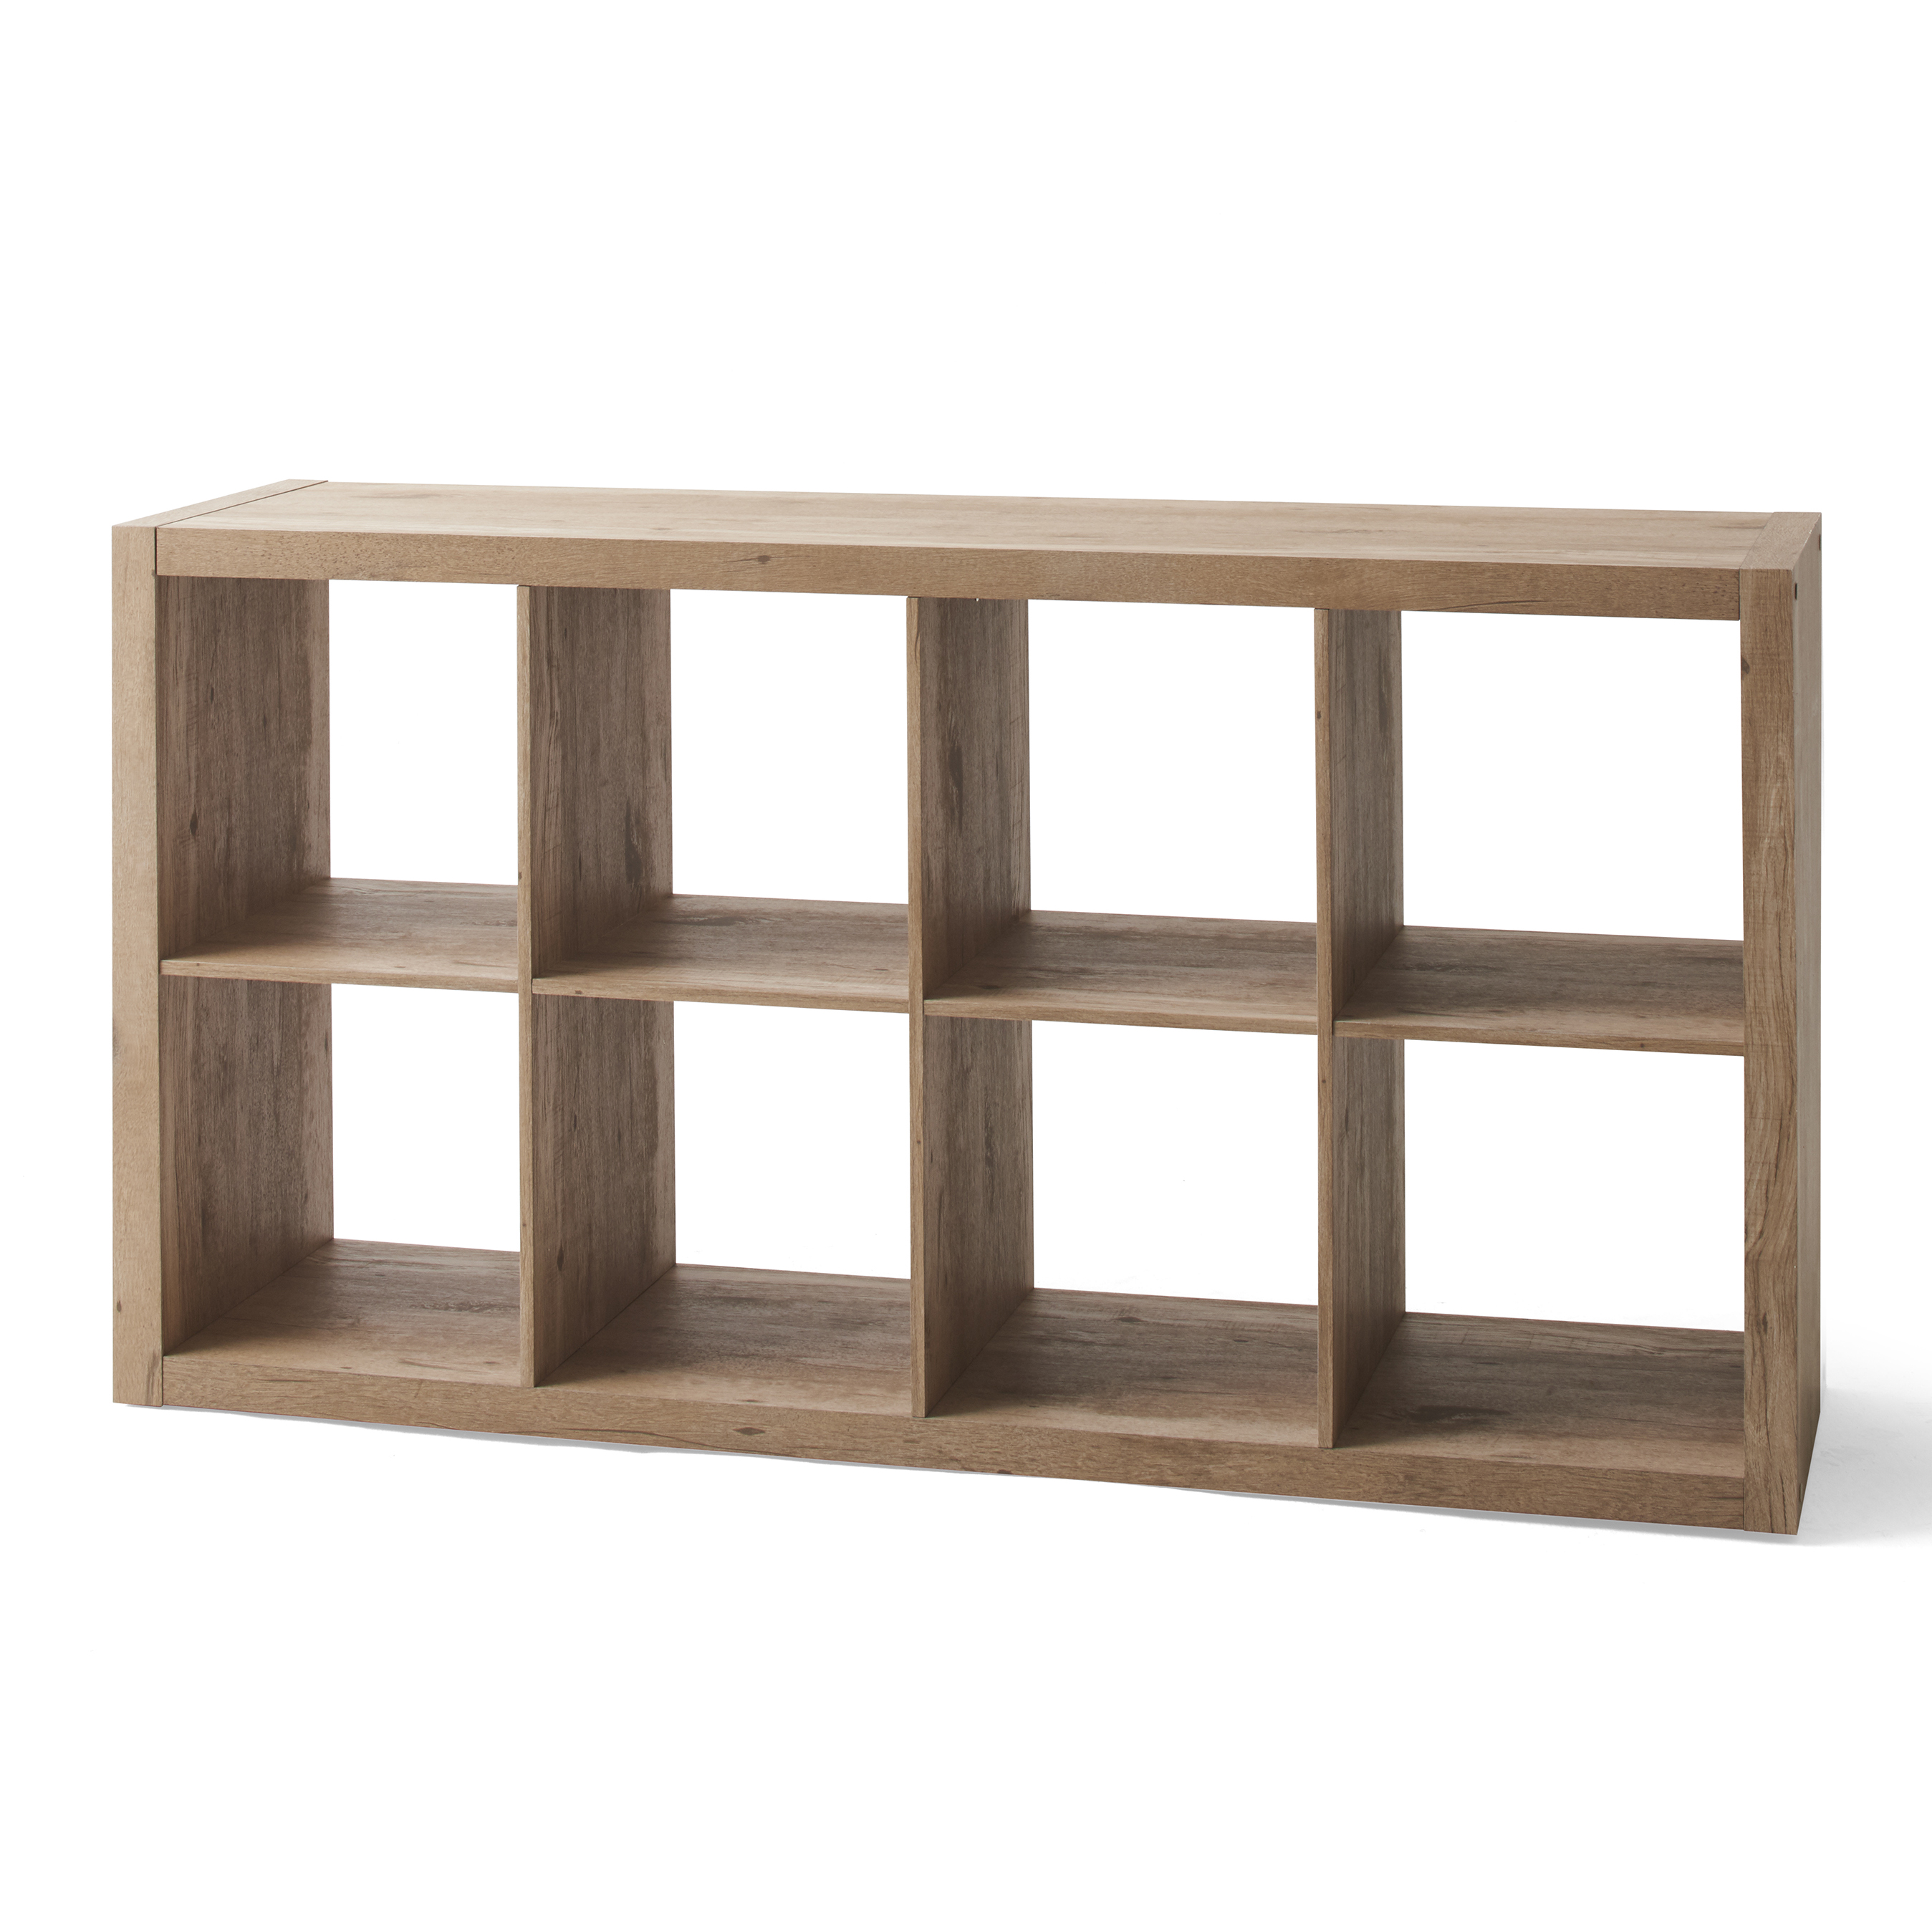 Better Homes & Gardens 8-Cube Storage Organizer, Natural - image 4 of 8